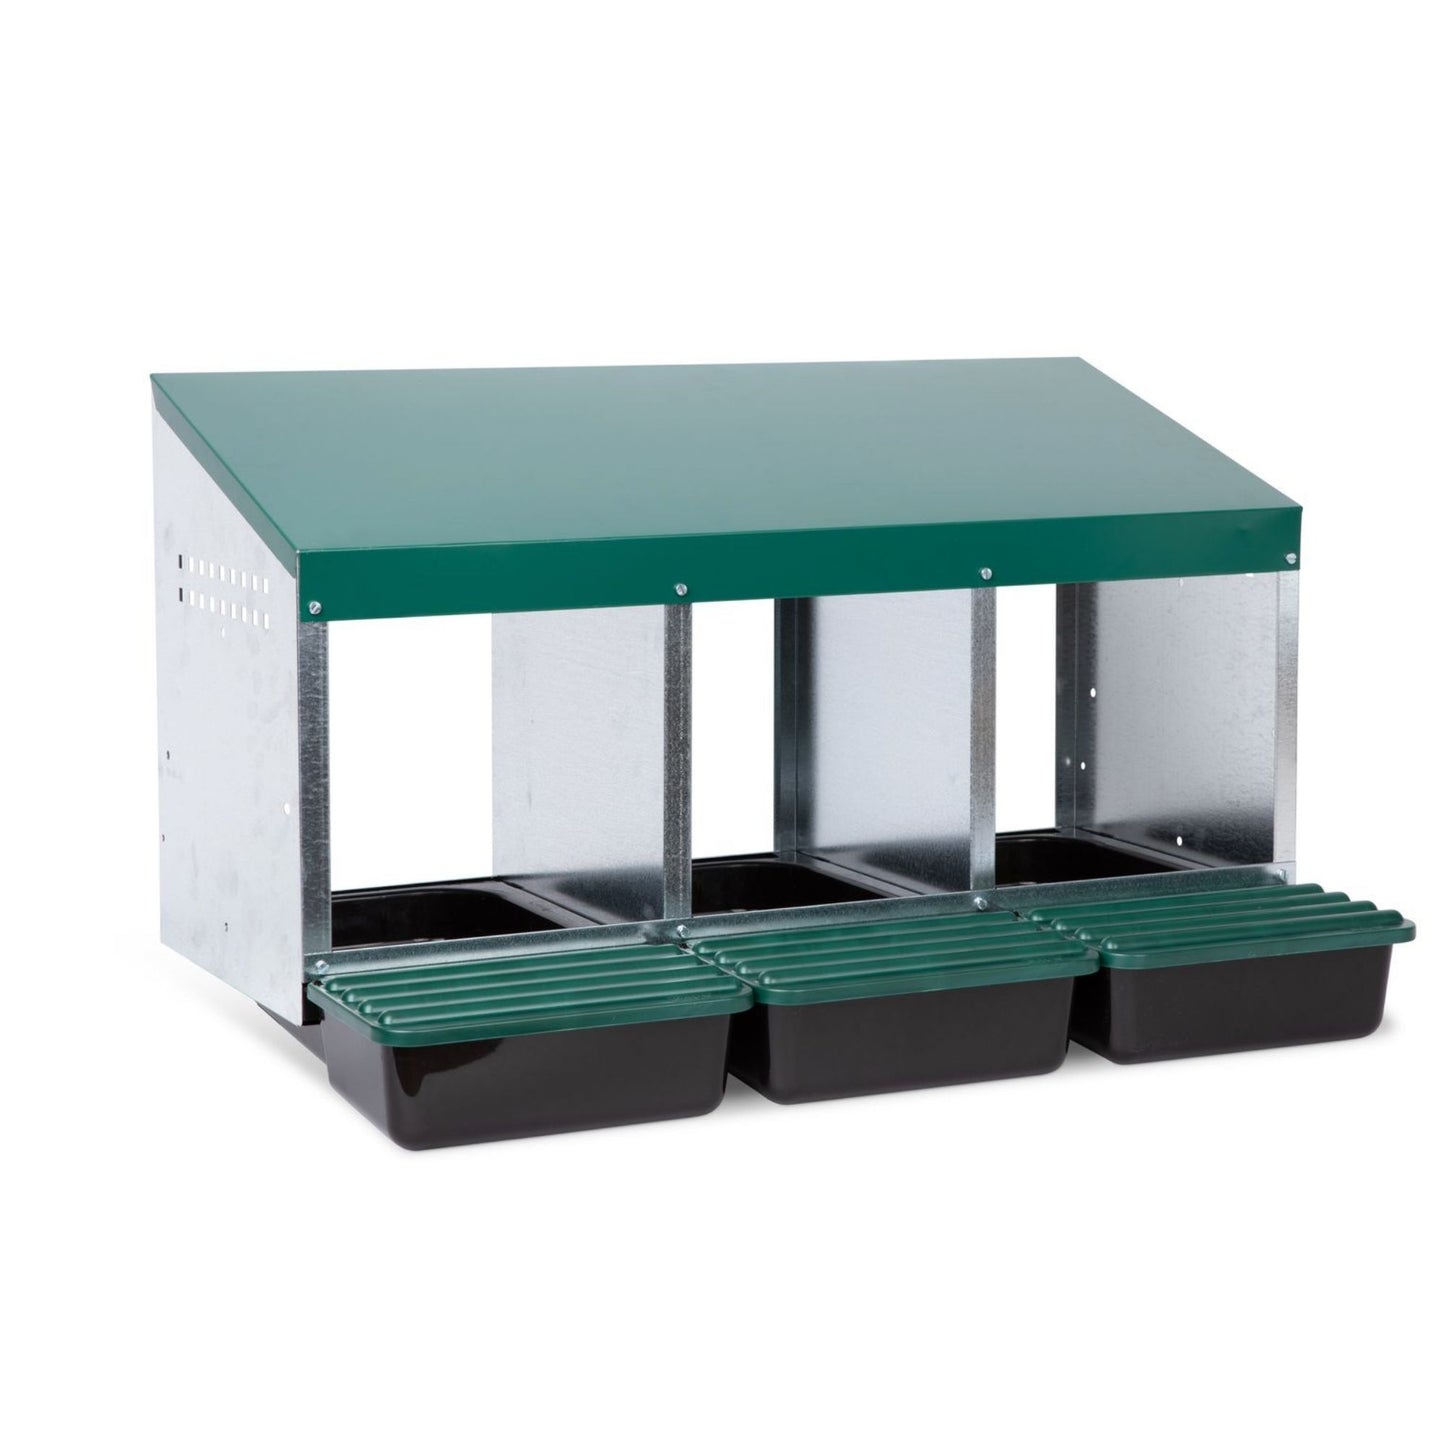 3 Compartment Roll Out Nesting Box with Compact Lids